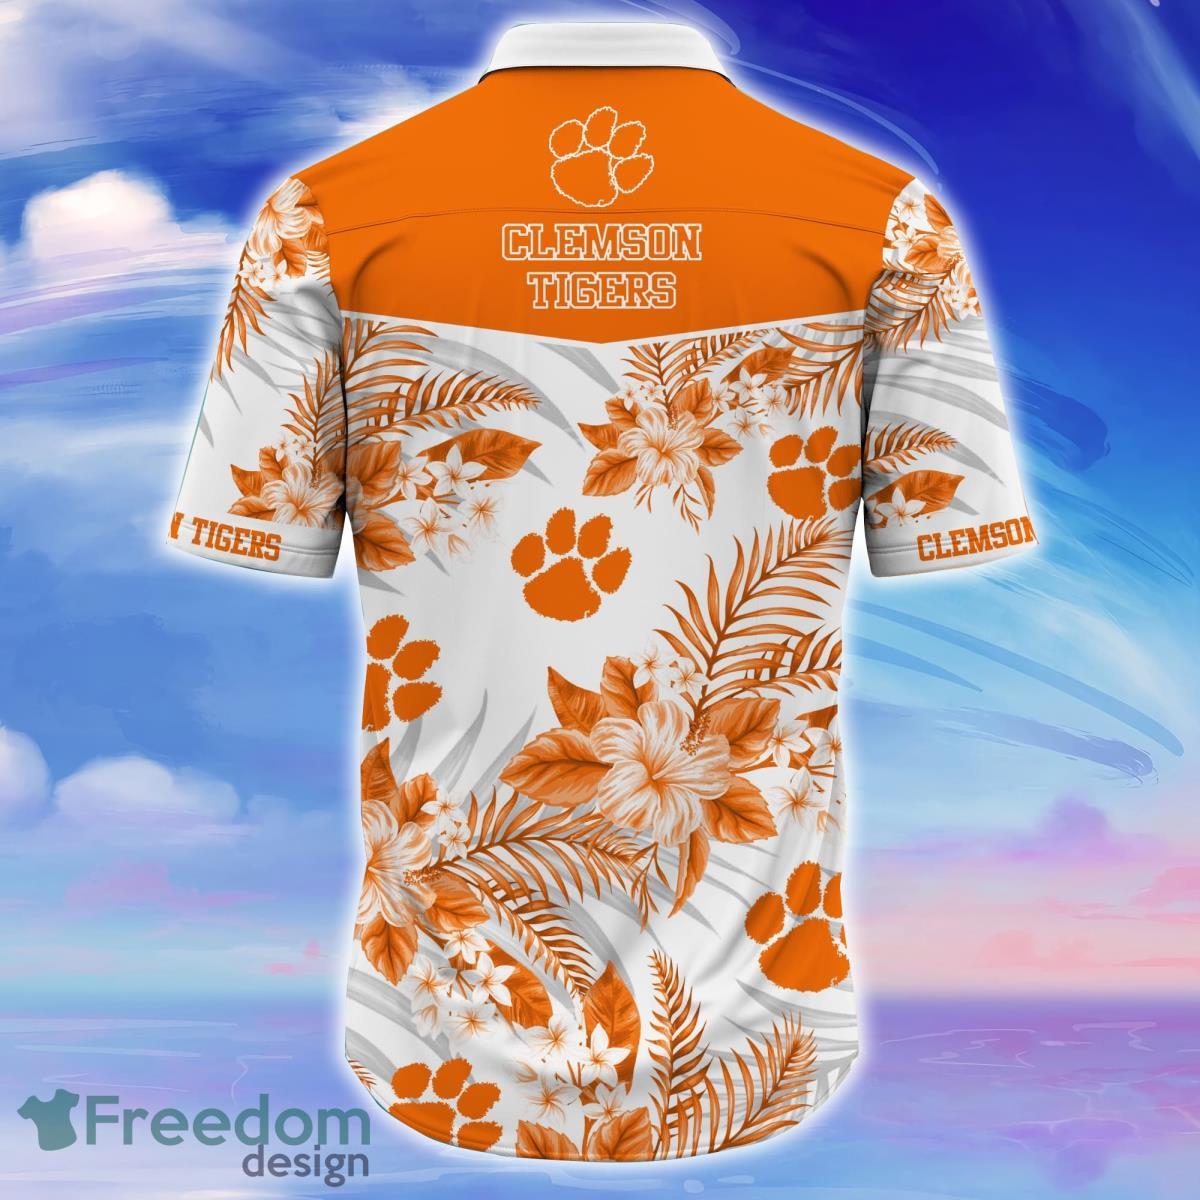 Trending] New Clemson Tigers Customize Jersey Football White